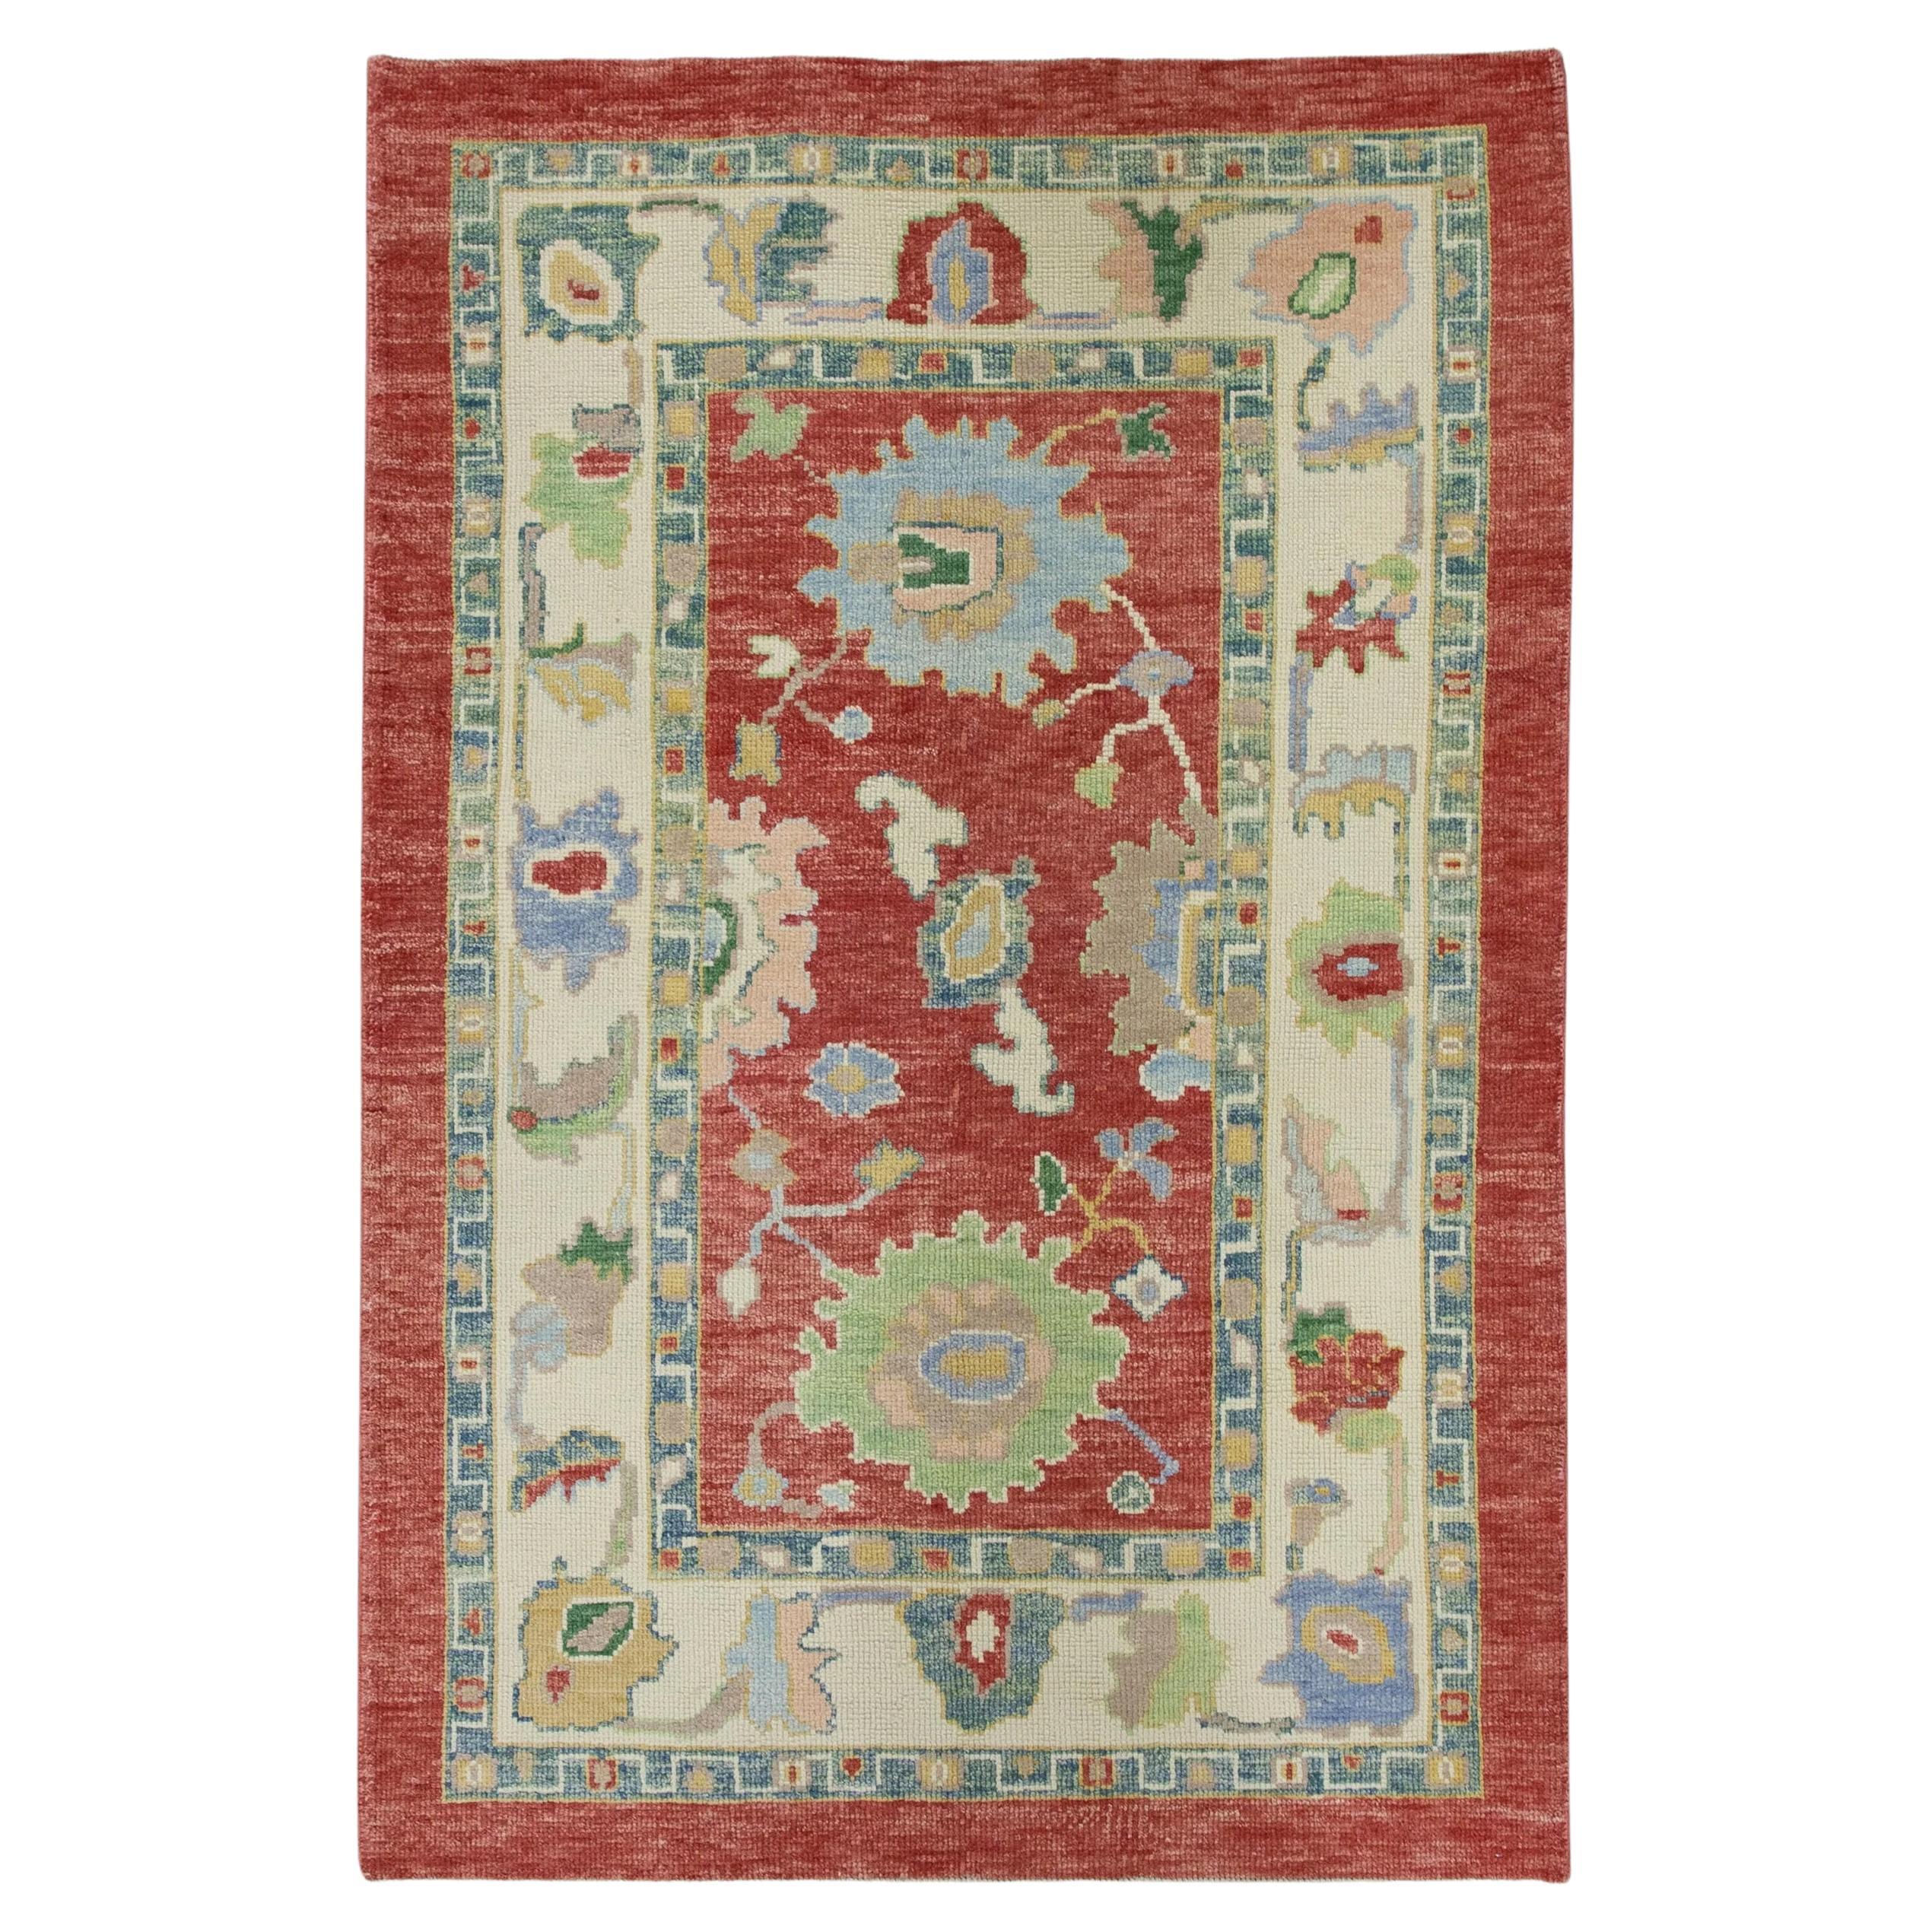 Red Handwoven Wool Turkish Oushak Rug in Blue & Green Floral Design 4'3" x 6'4"